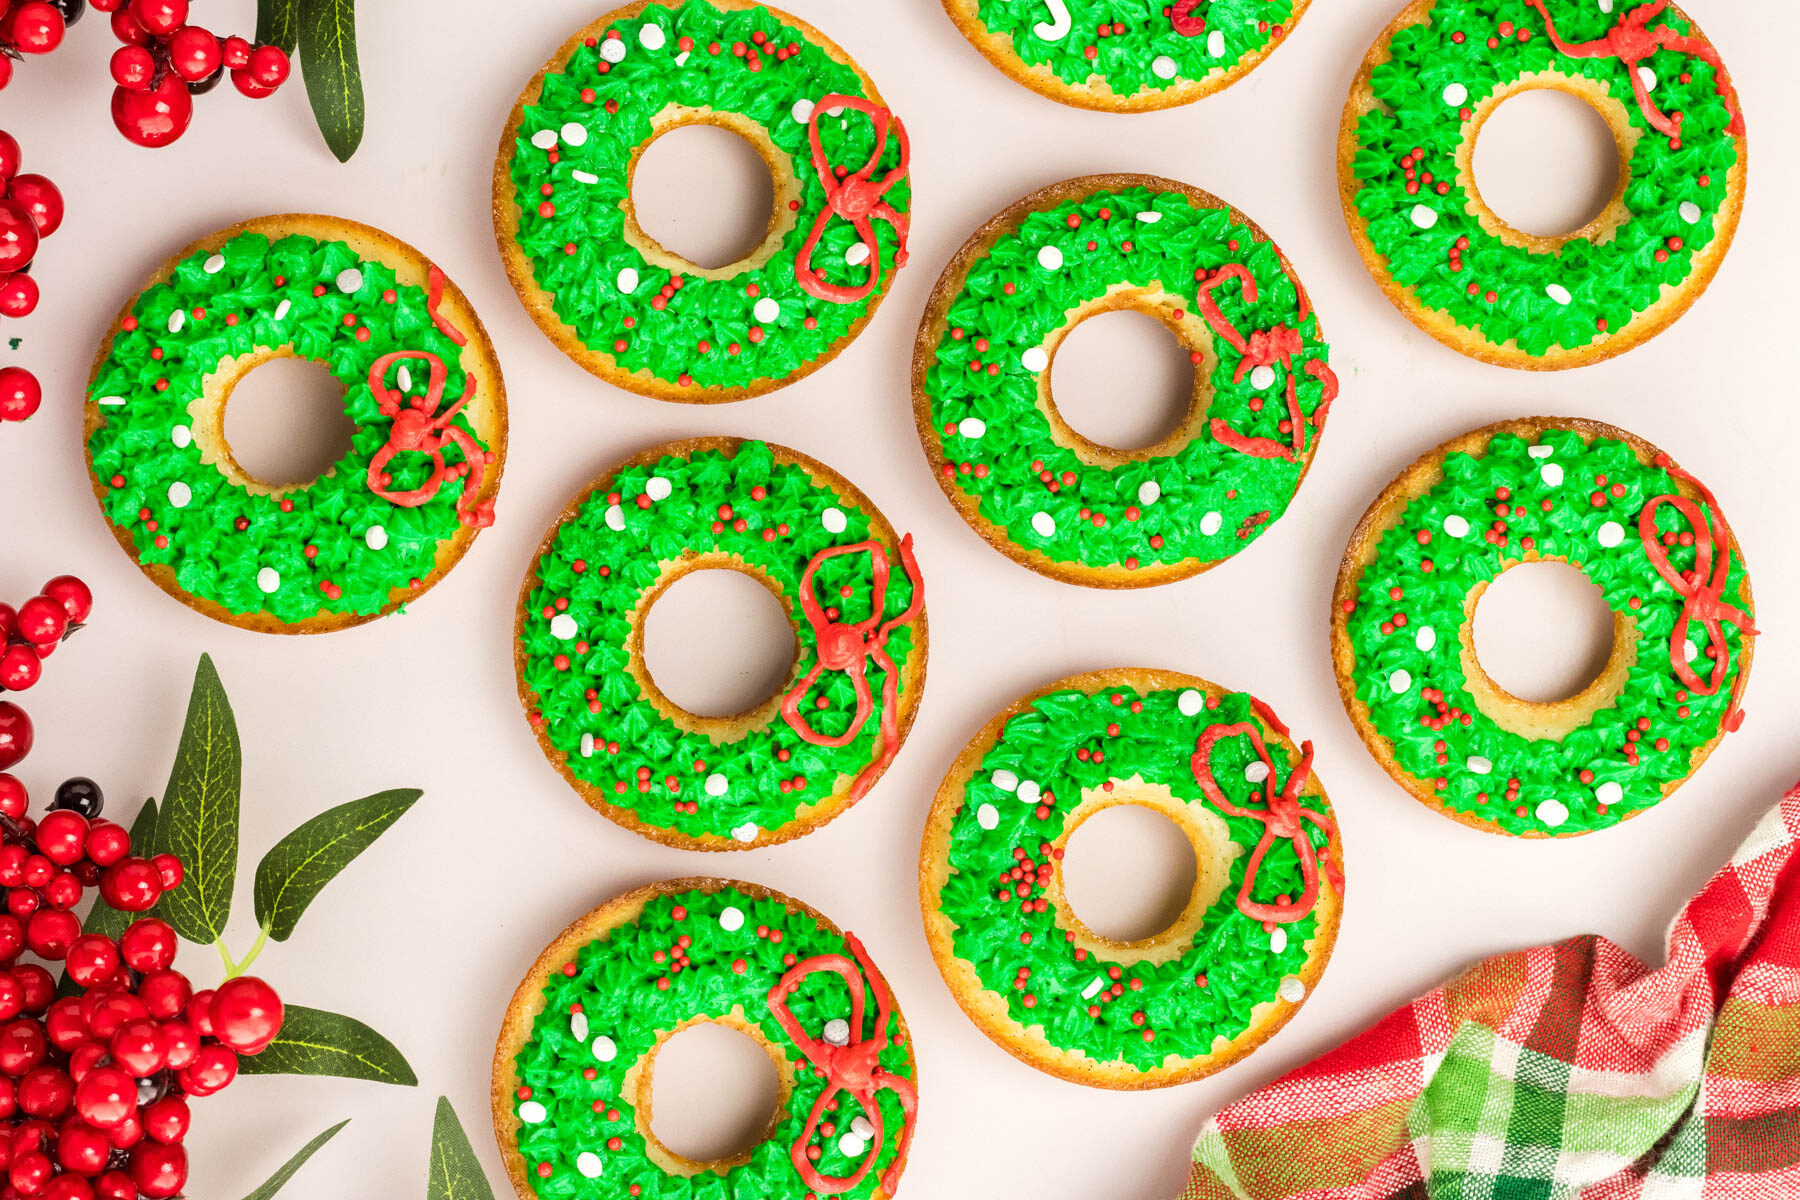 Donuts decorated with christmas wreaths and berries.